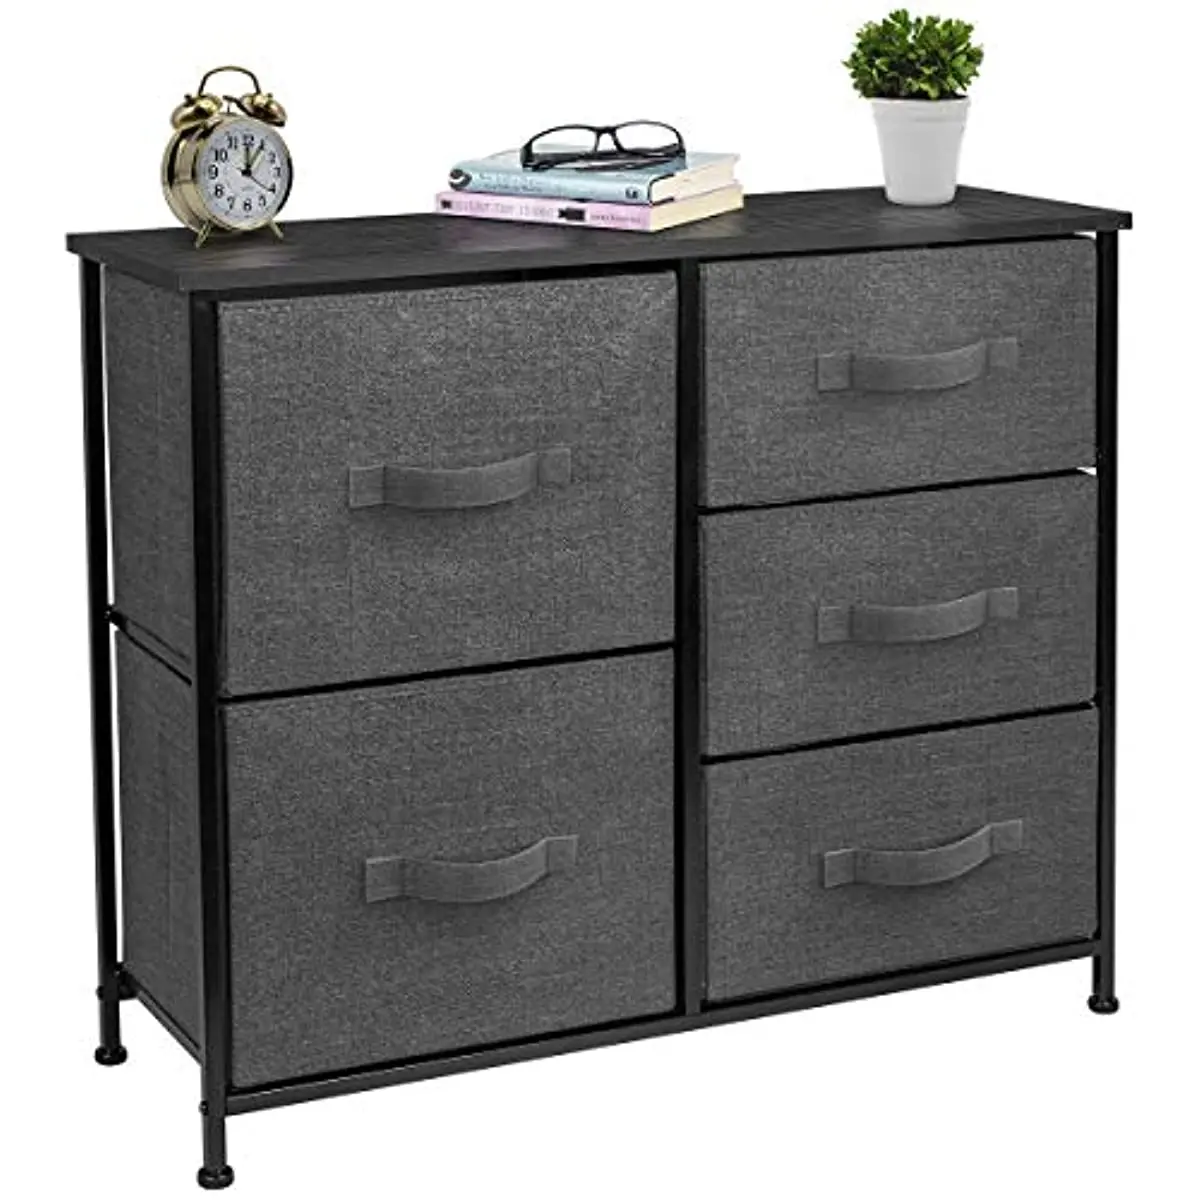 Sorbus Dresser with 5 Drawers - Furniture Storage Tower Unit for Bedroom, Hallway, Closet, Office Organization